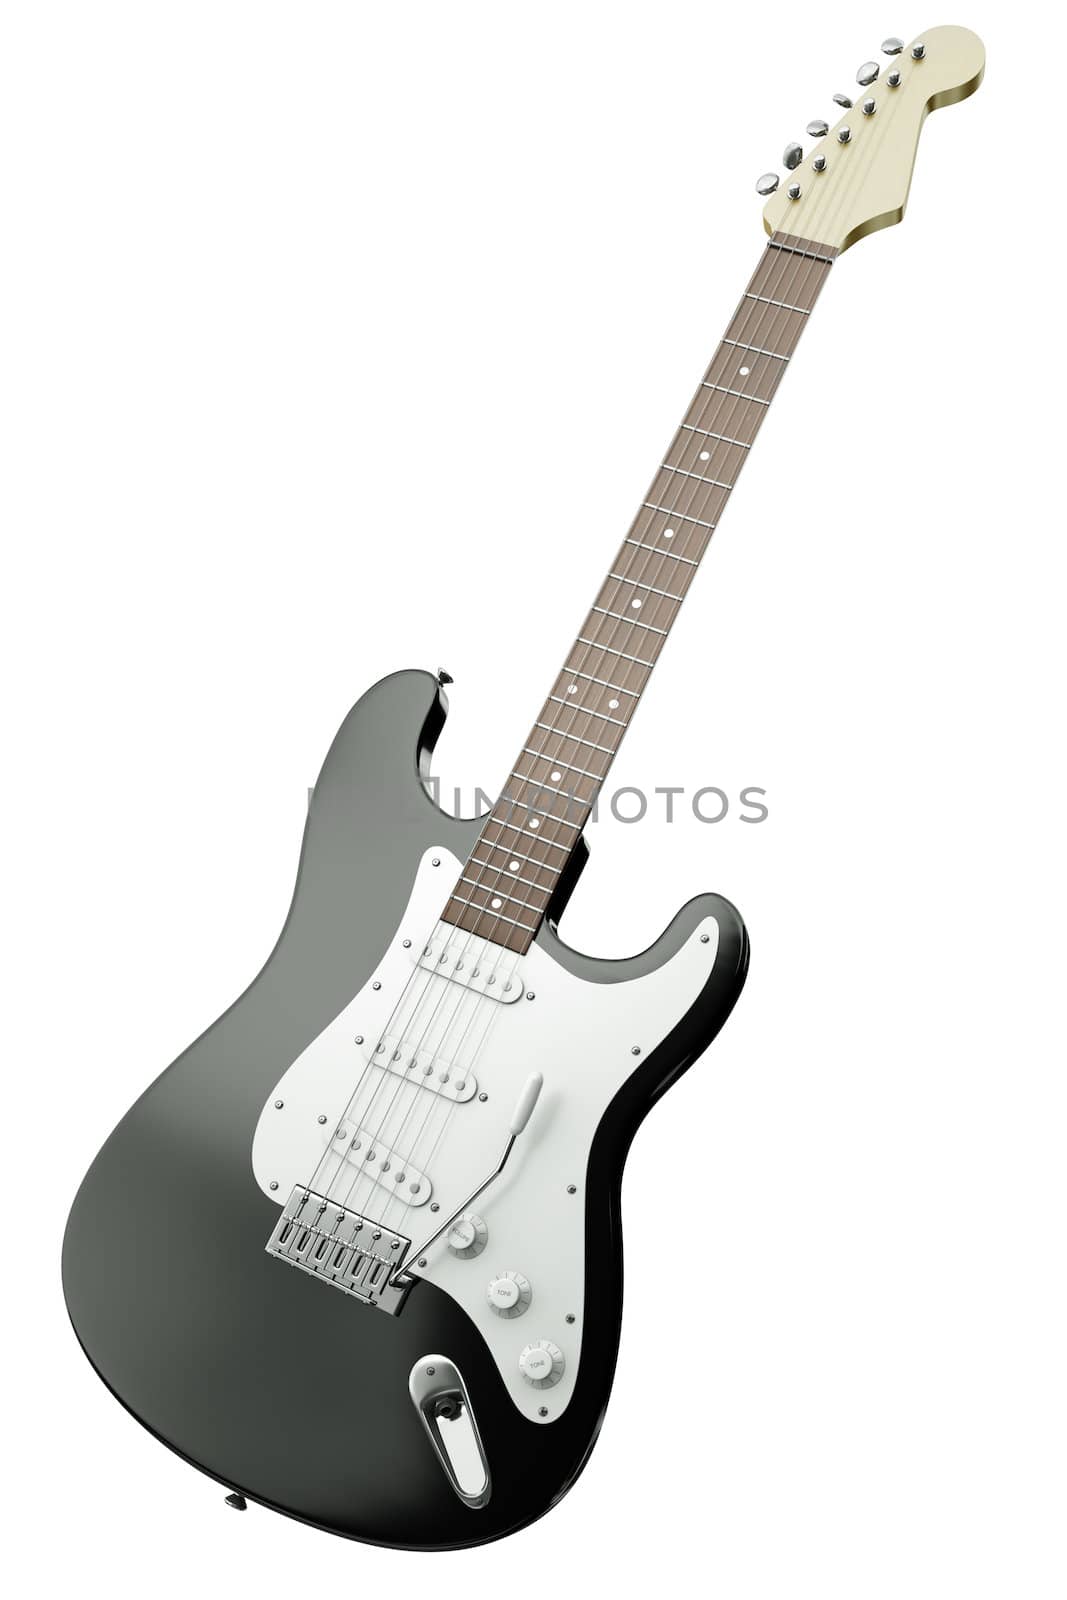 Electric guitar by bayberry